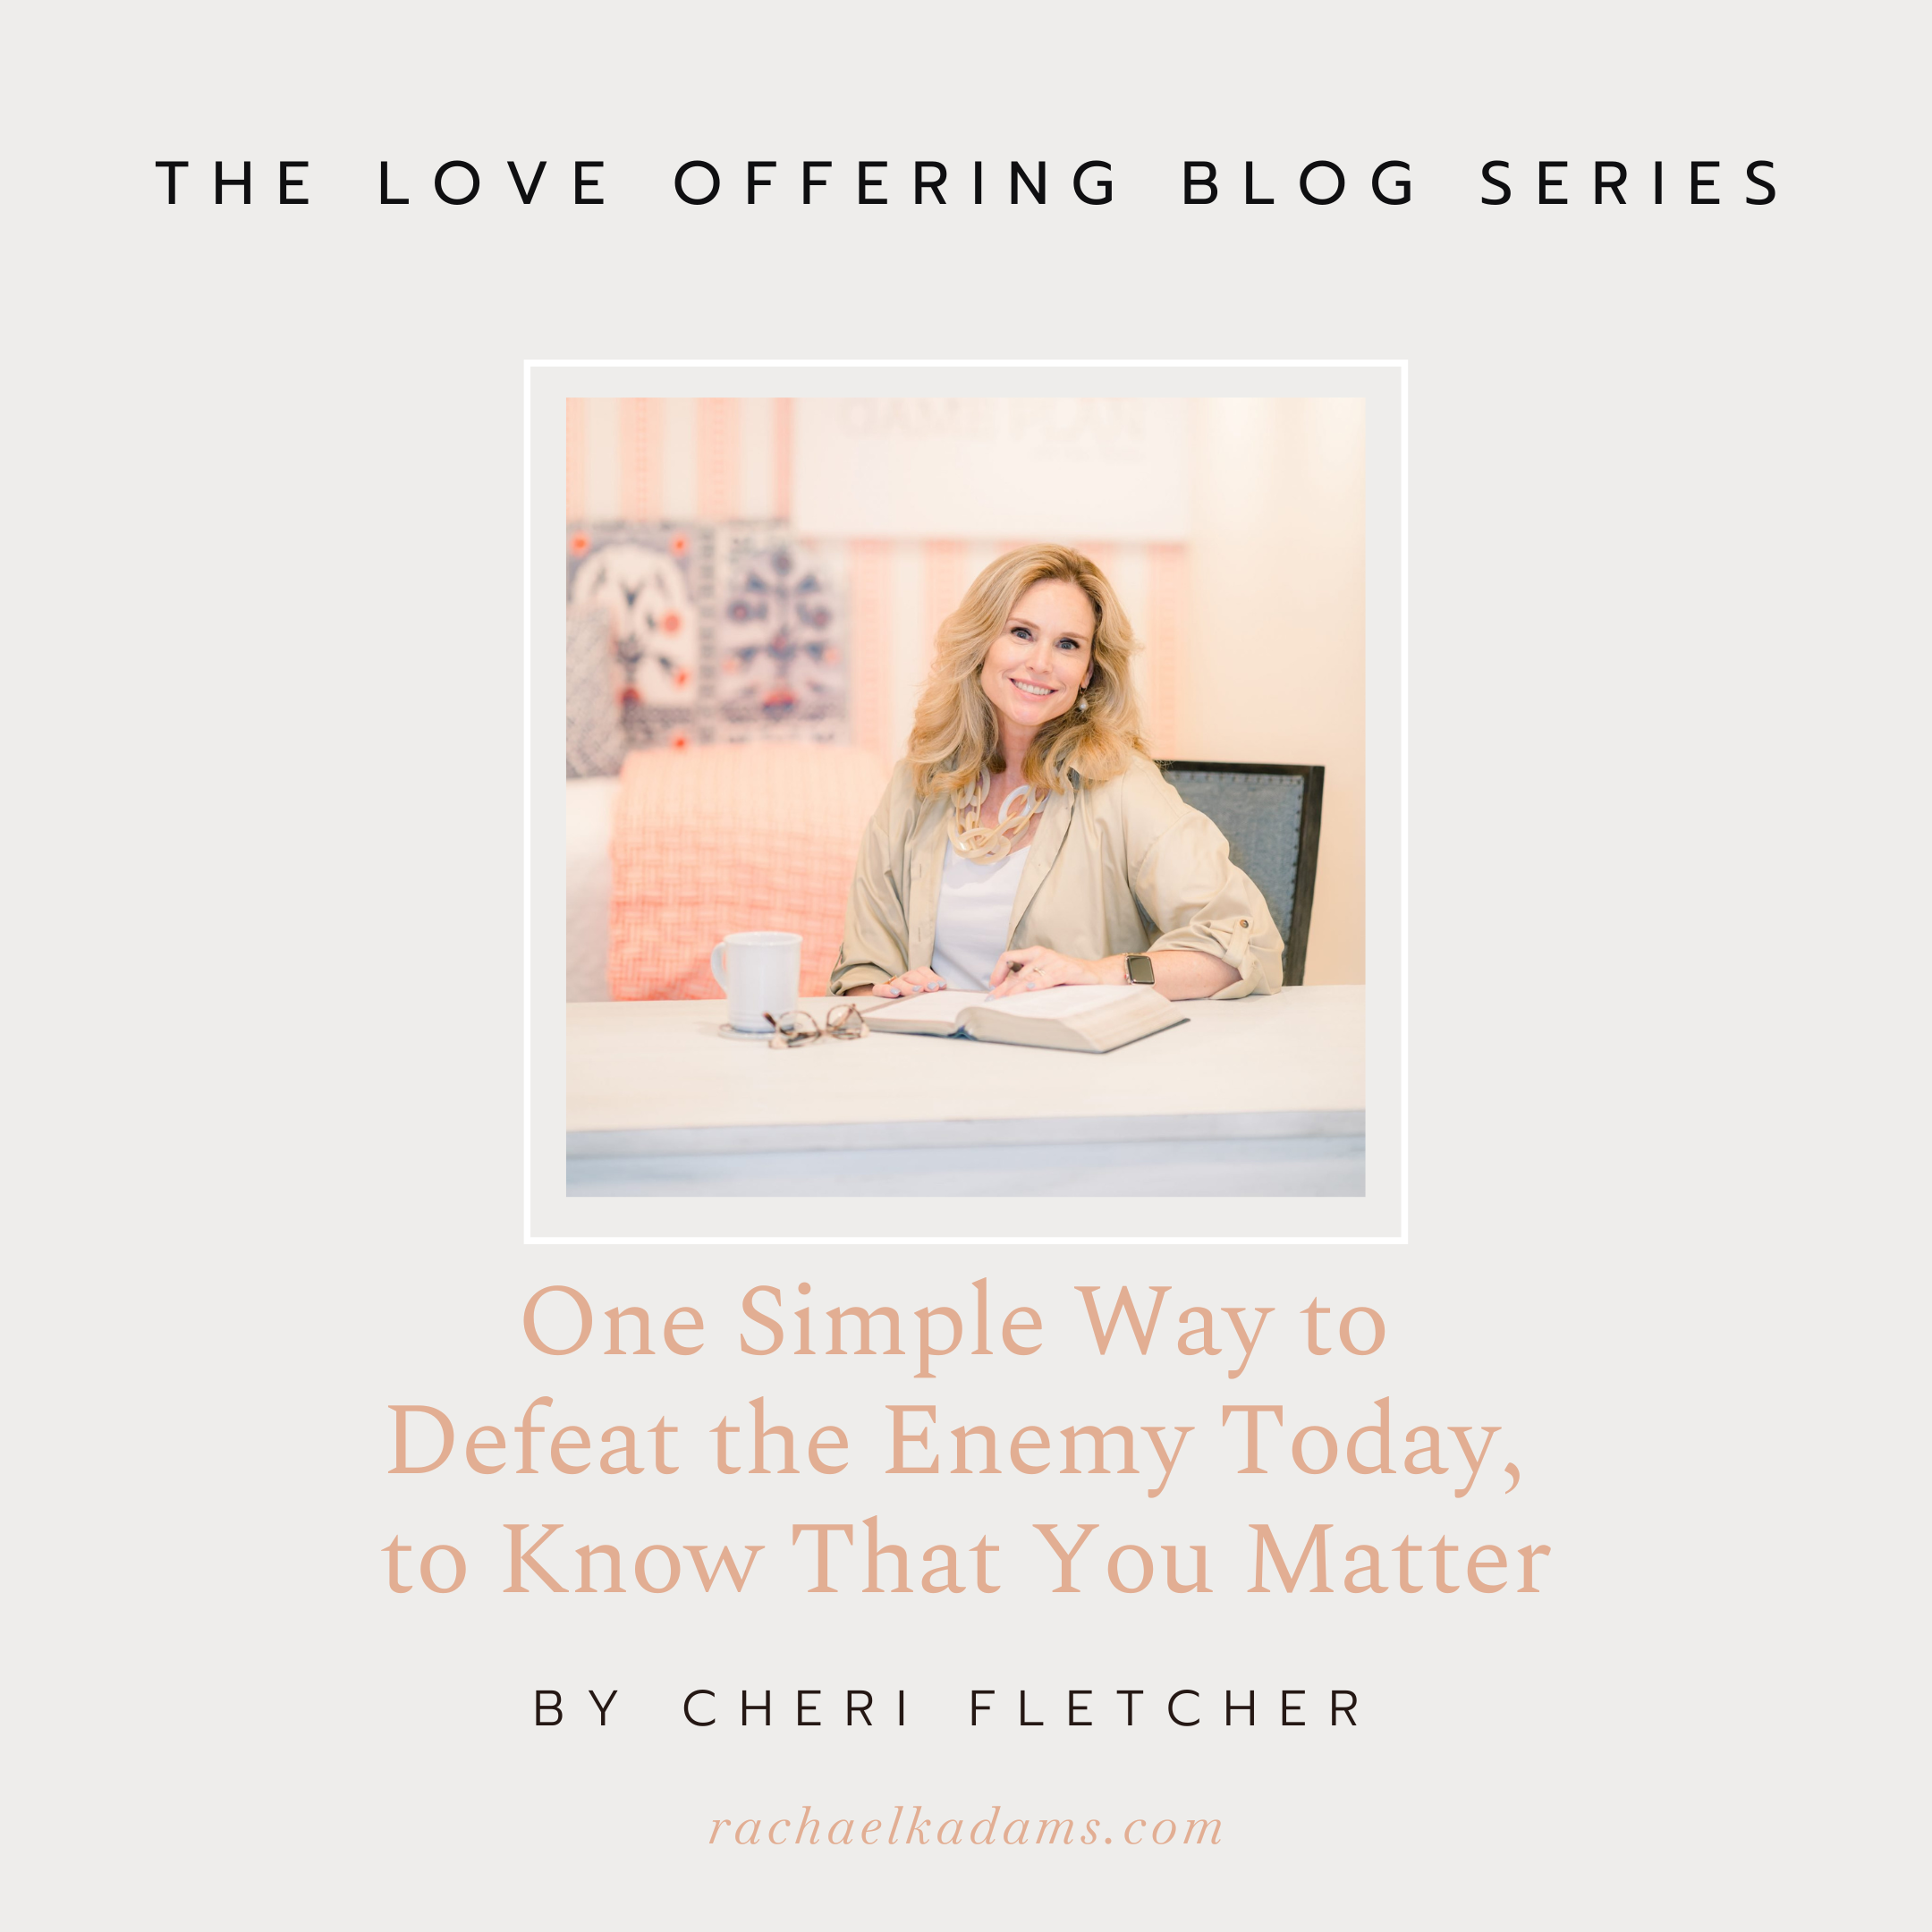 One Simple Way to Defeat the Enemy Today, to Know That you Matter by Cheri Fletcher